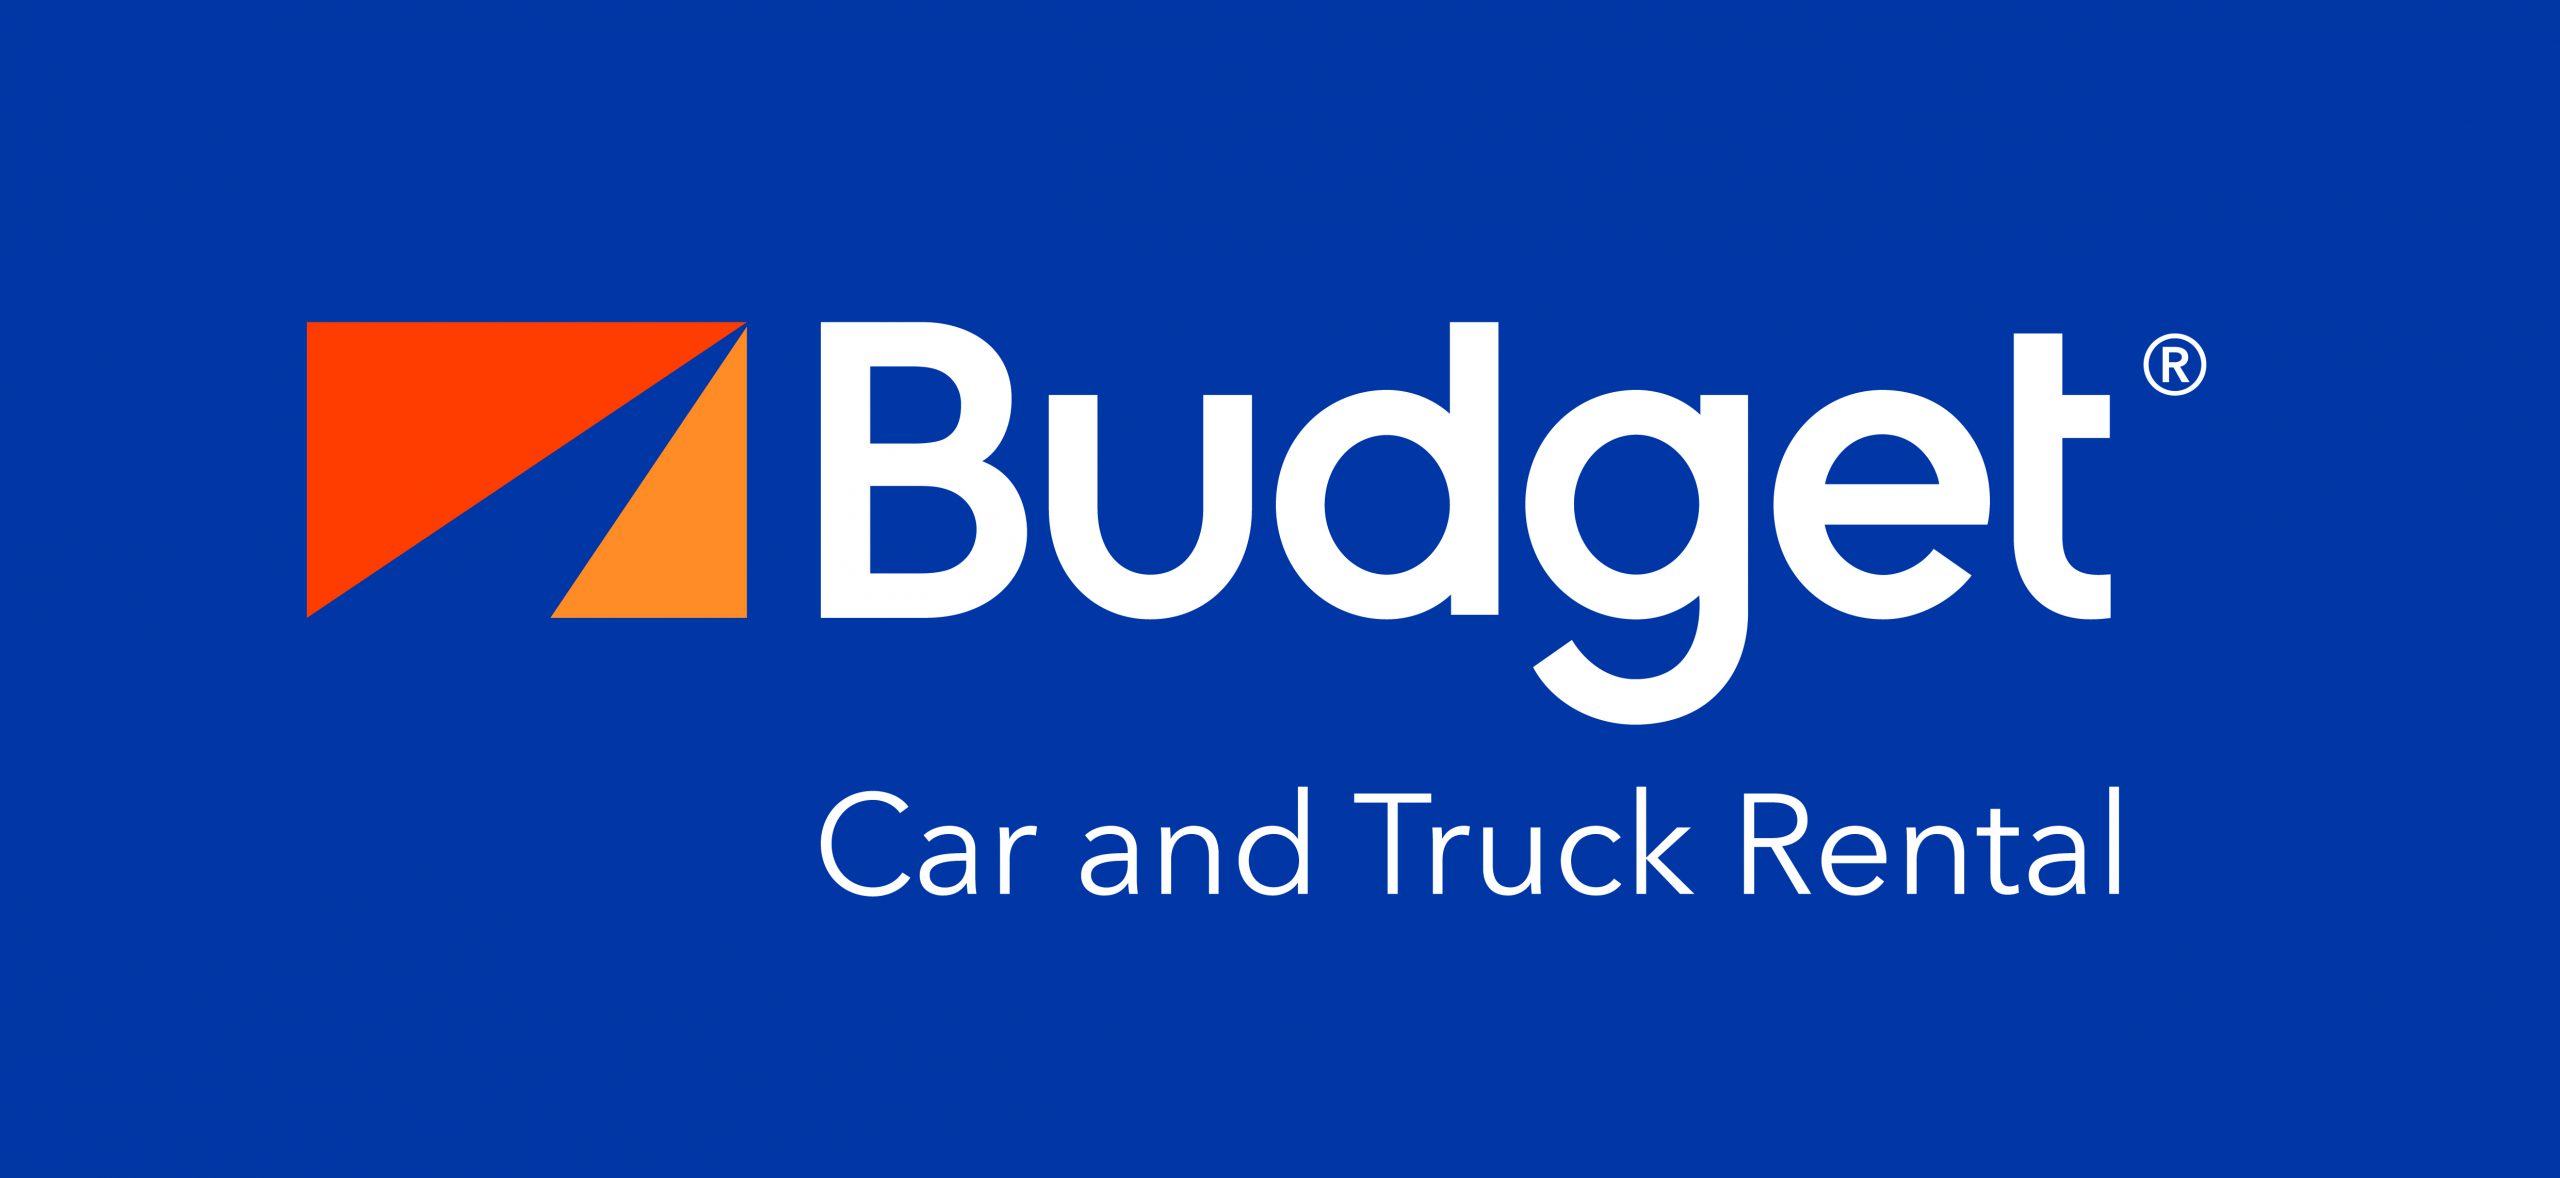 A13,A46 BUDGET CAR AND TRUCK RENTAL